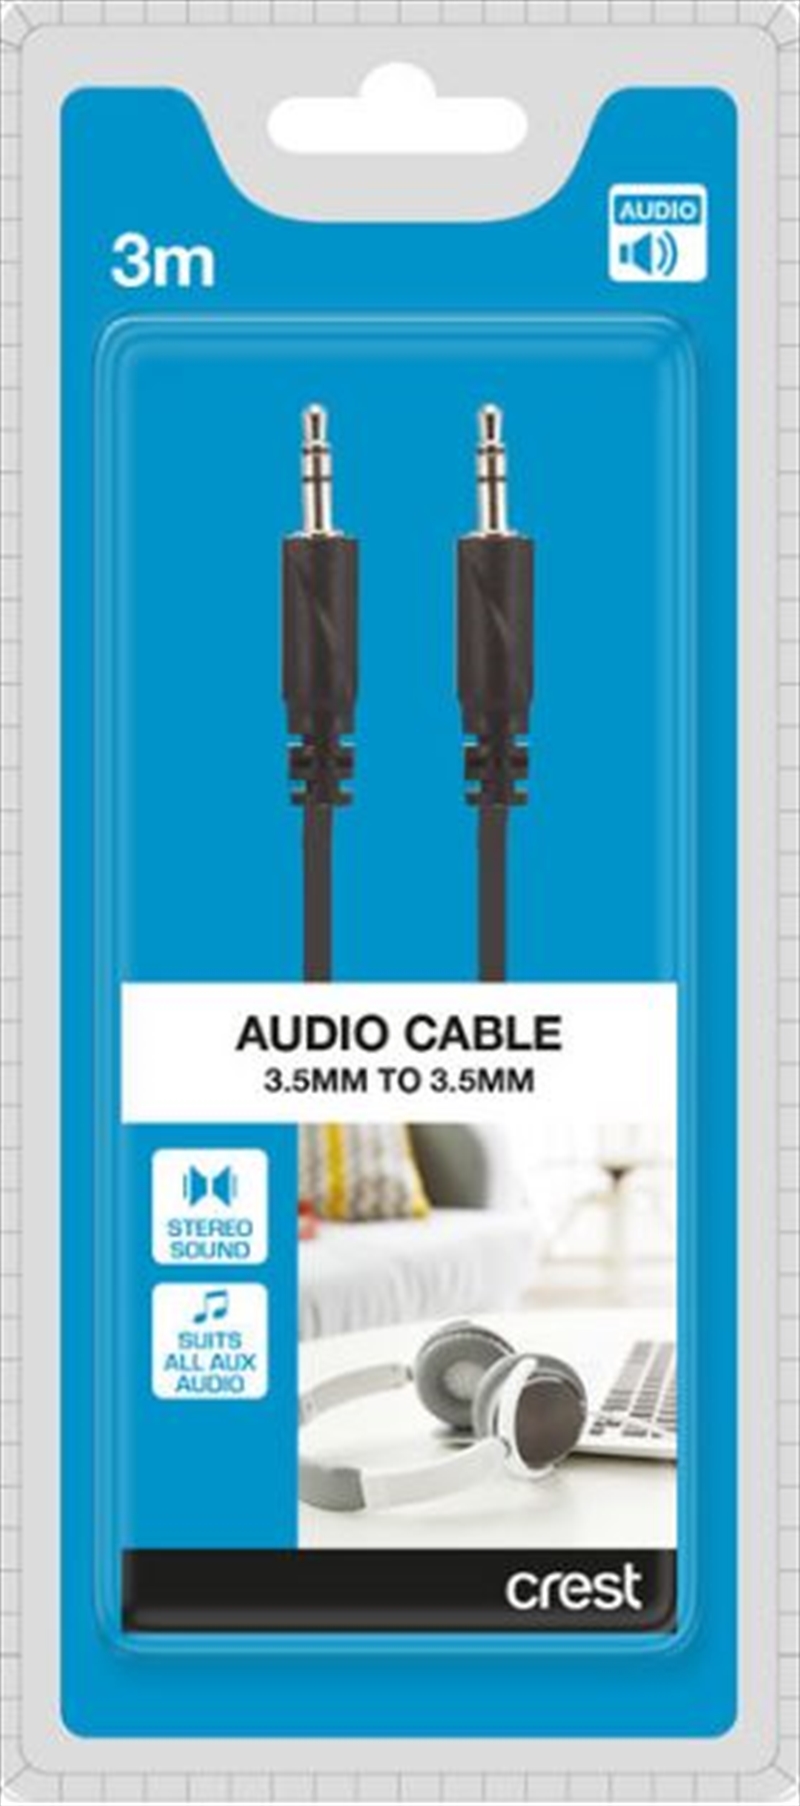 3.5mm To 3.5mm Audio Cable - 3M/Product Detail/Cables